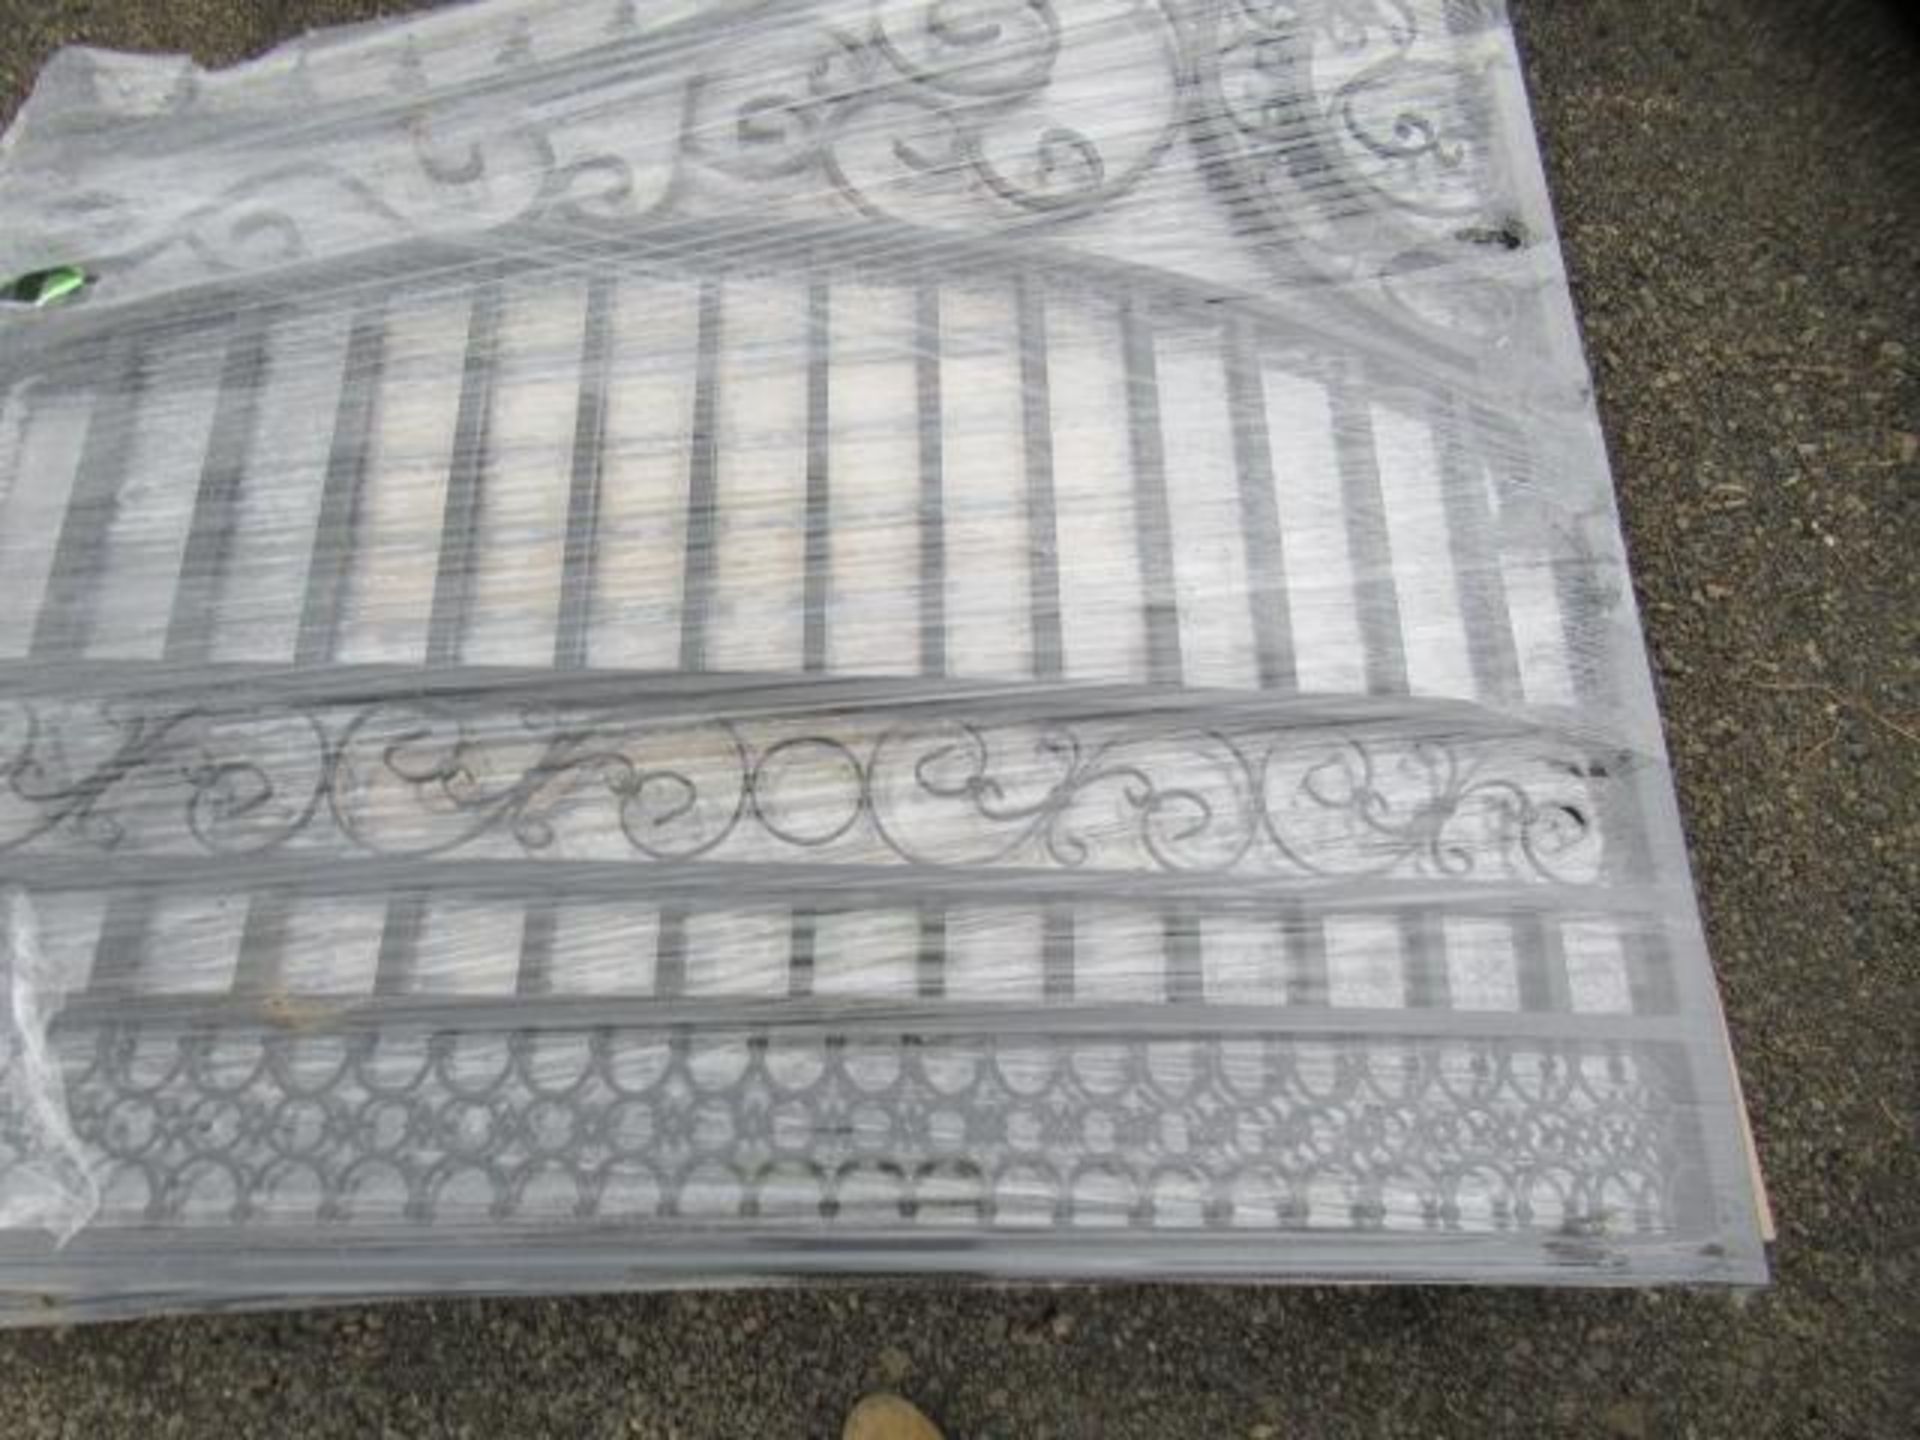 GREATBEAR 14' BI-PARTING WROUGHT IRON GATE WITH ORNATE ARTWORK (UNUSED) - Image 3 of 3